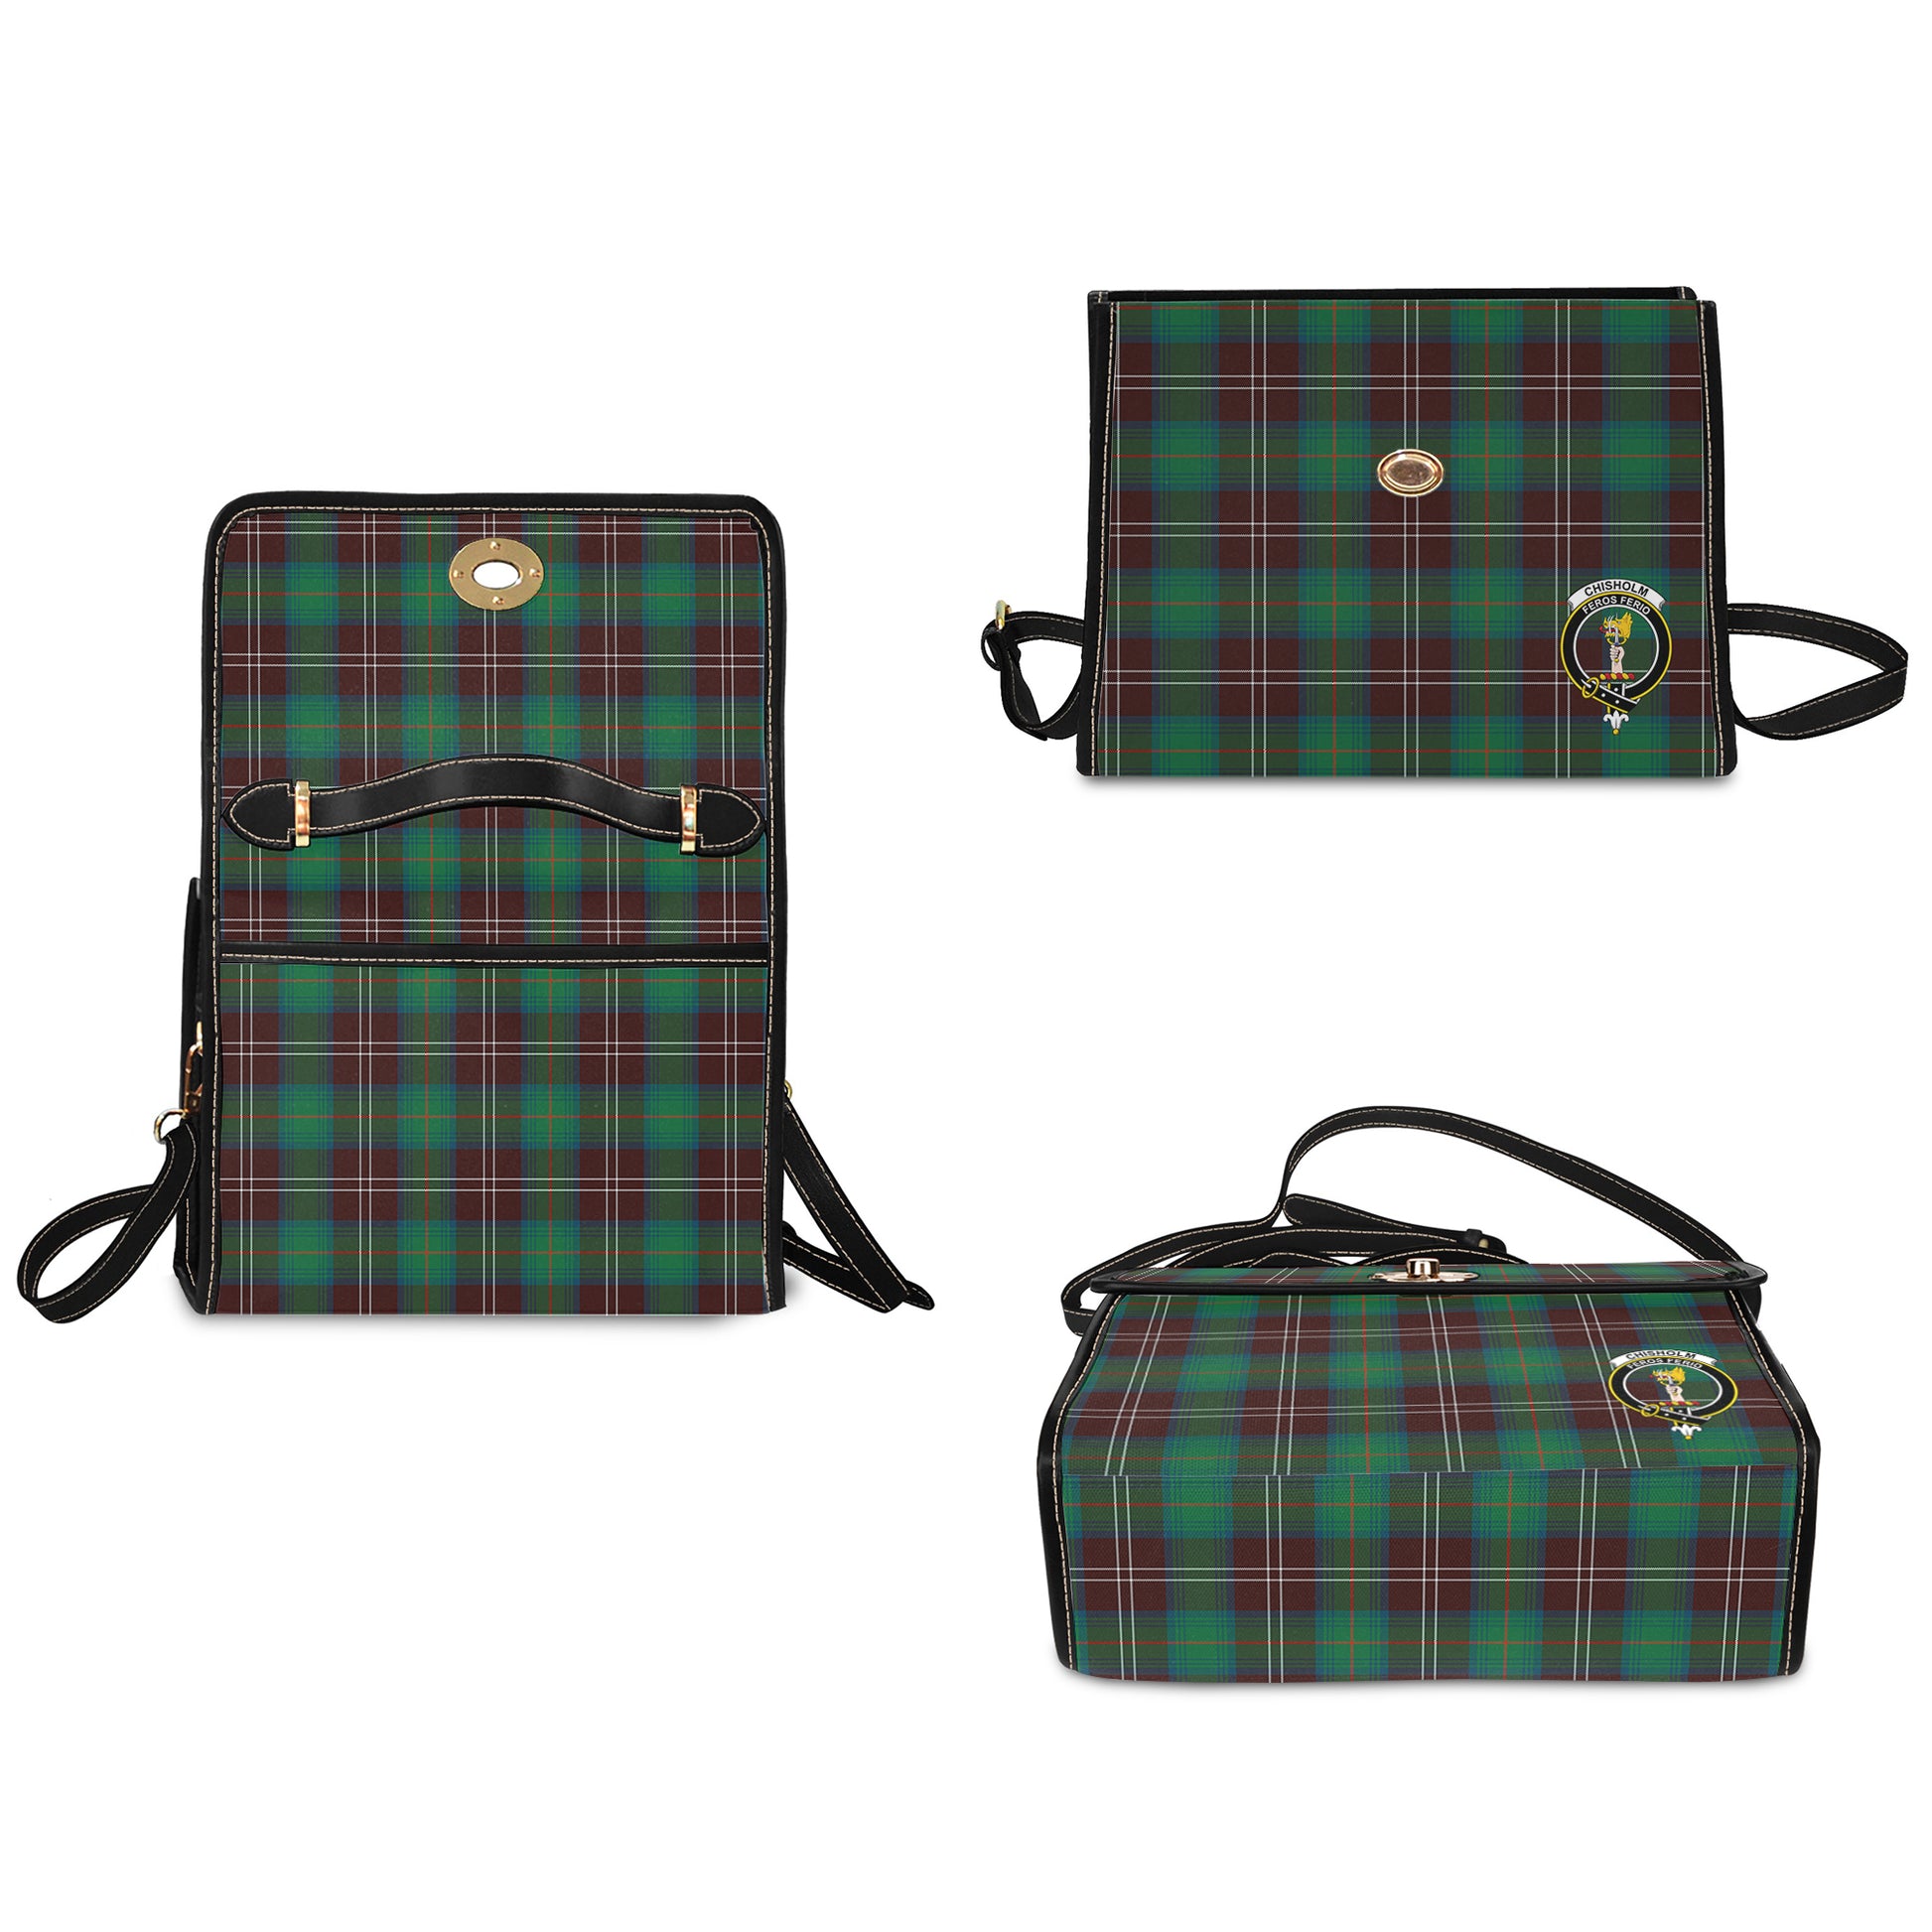 chisholm-hunting-ancient-tartan-leather-strap-waterproof-canvas-bag-with-family-crest